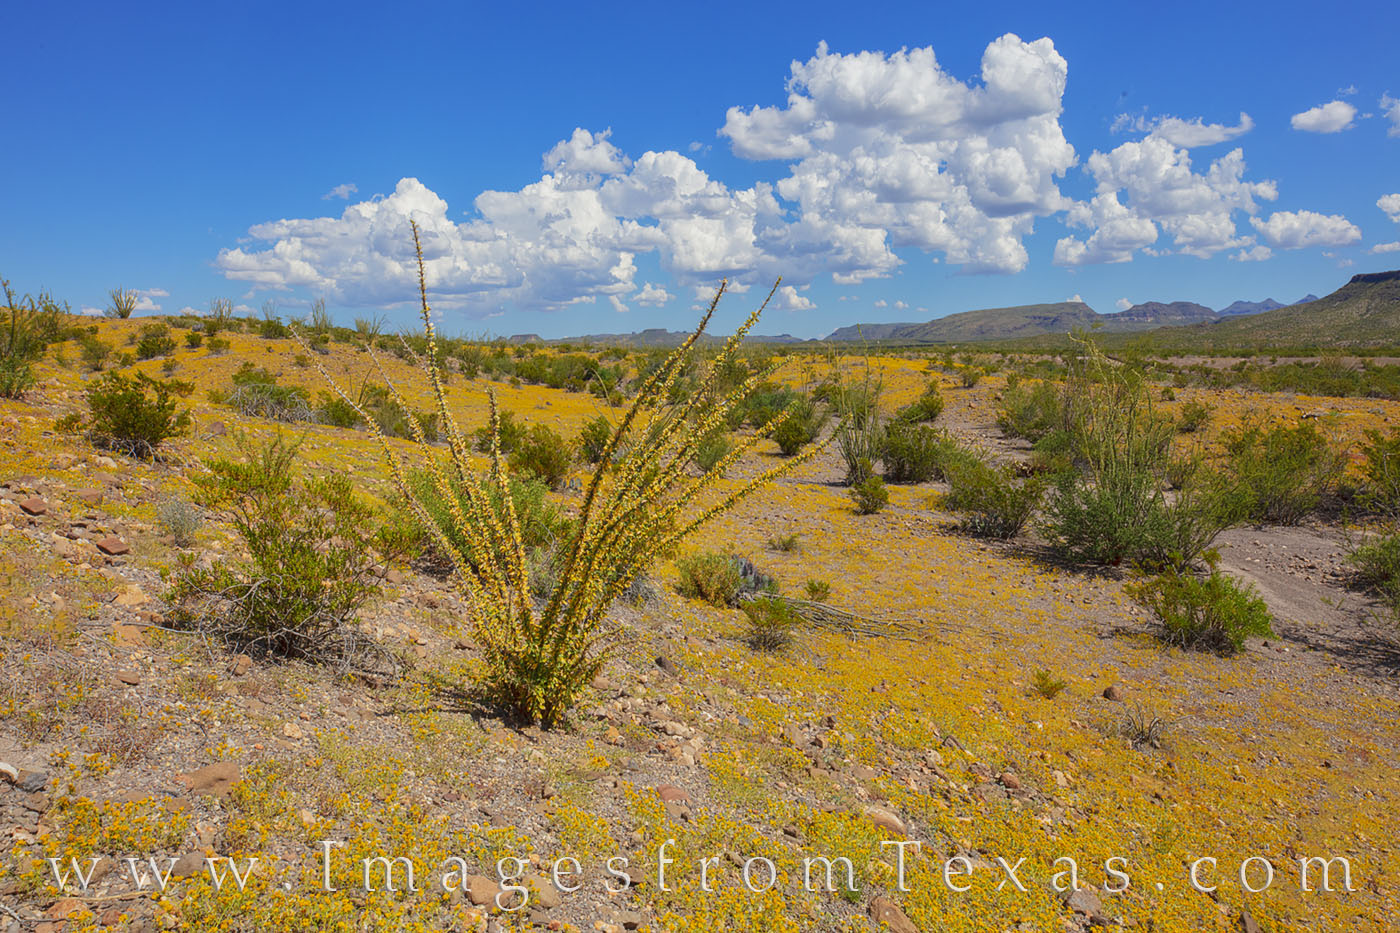 After rains fell across the Chihuahuan Desert in Big Bend Ranch State Park, tiny golden flowers bloomed across the landscape....